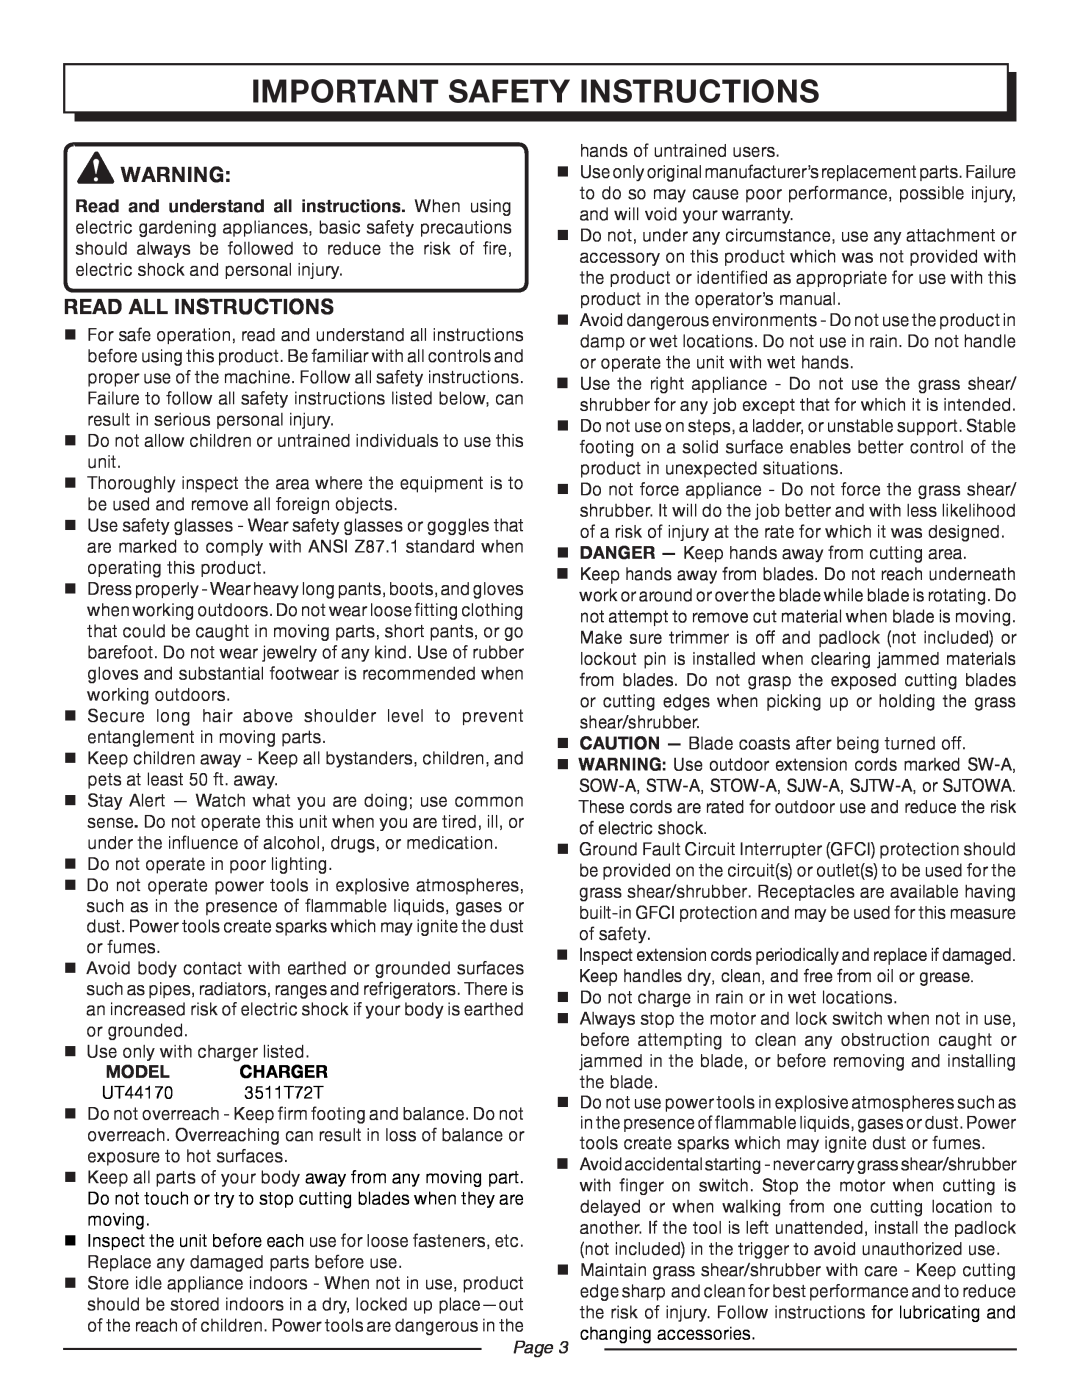 Homelite UT44170 manual important safety instructions, read all instructions 